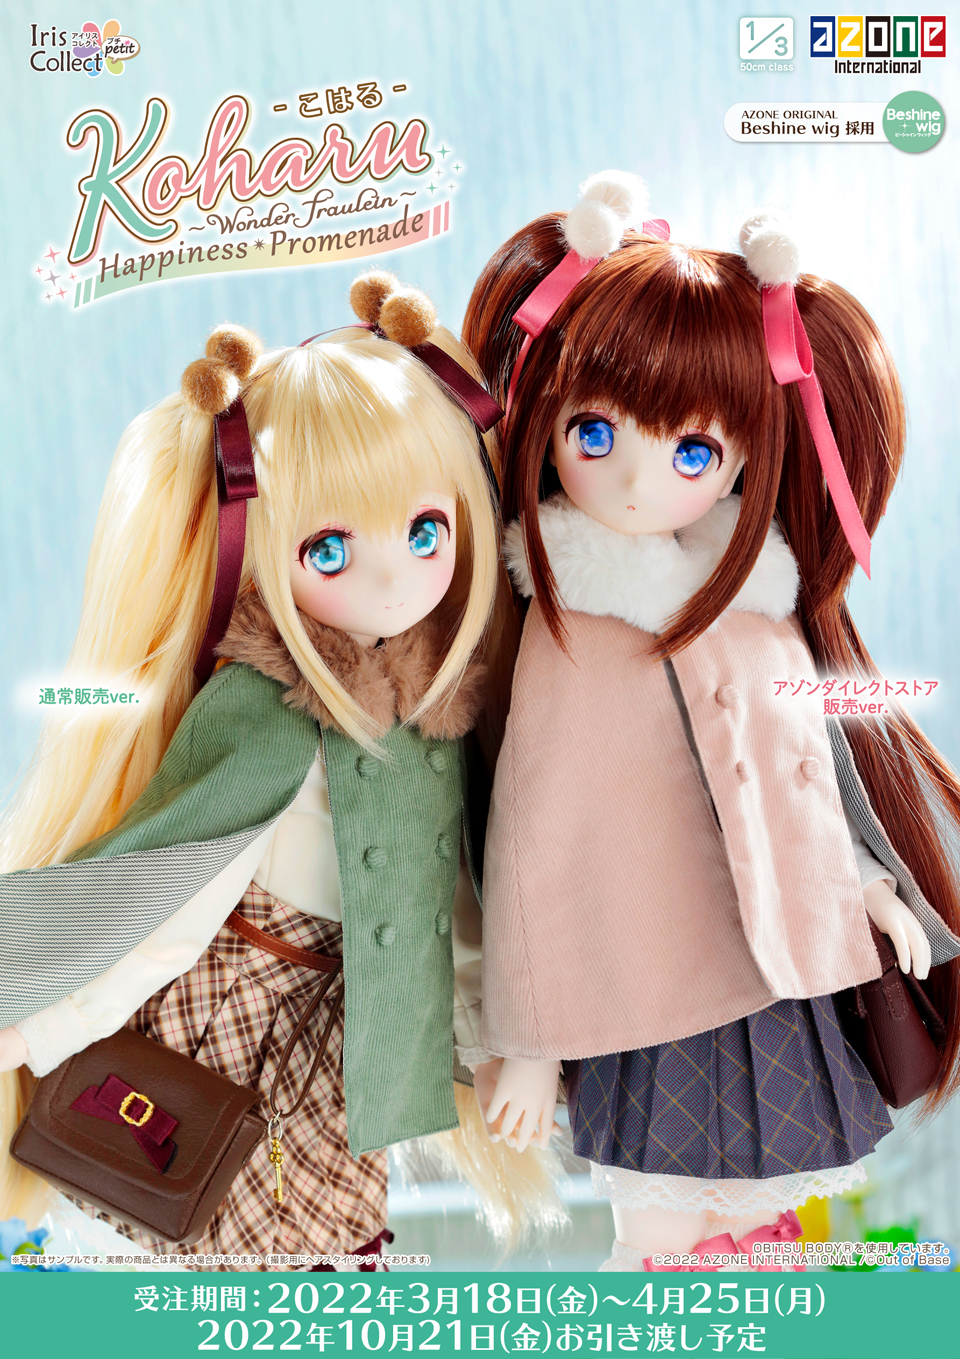 AZONE Labelshop OSAKA OFFICIAL BLOG Iris Collect petit『こはる